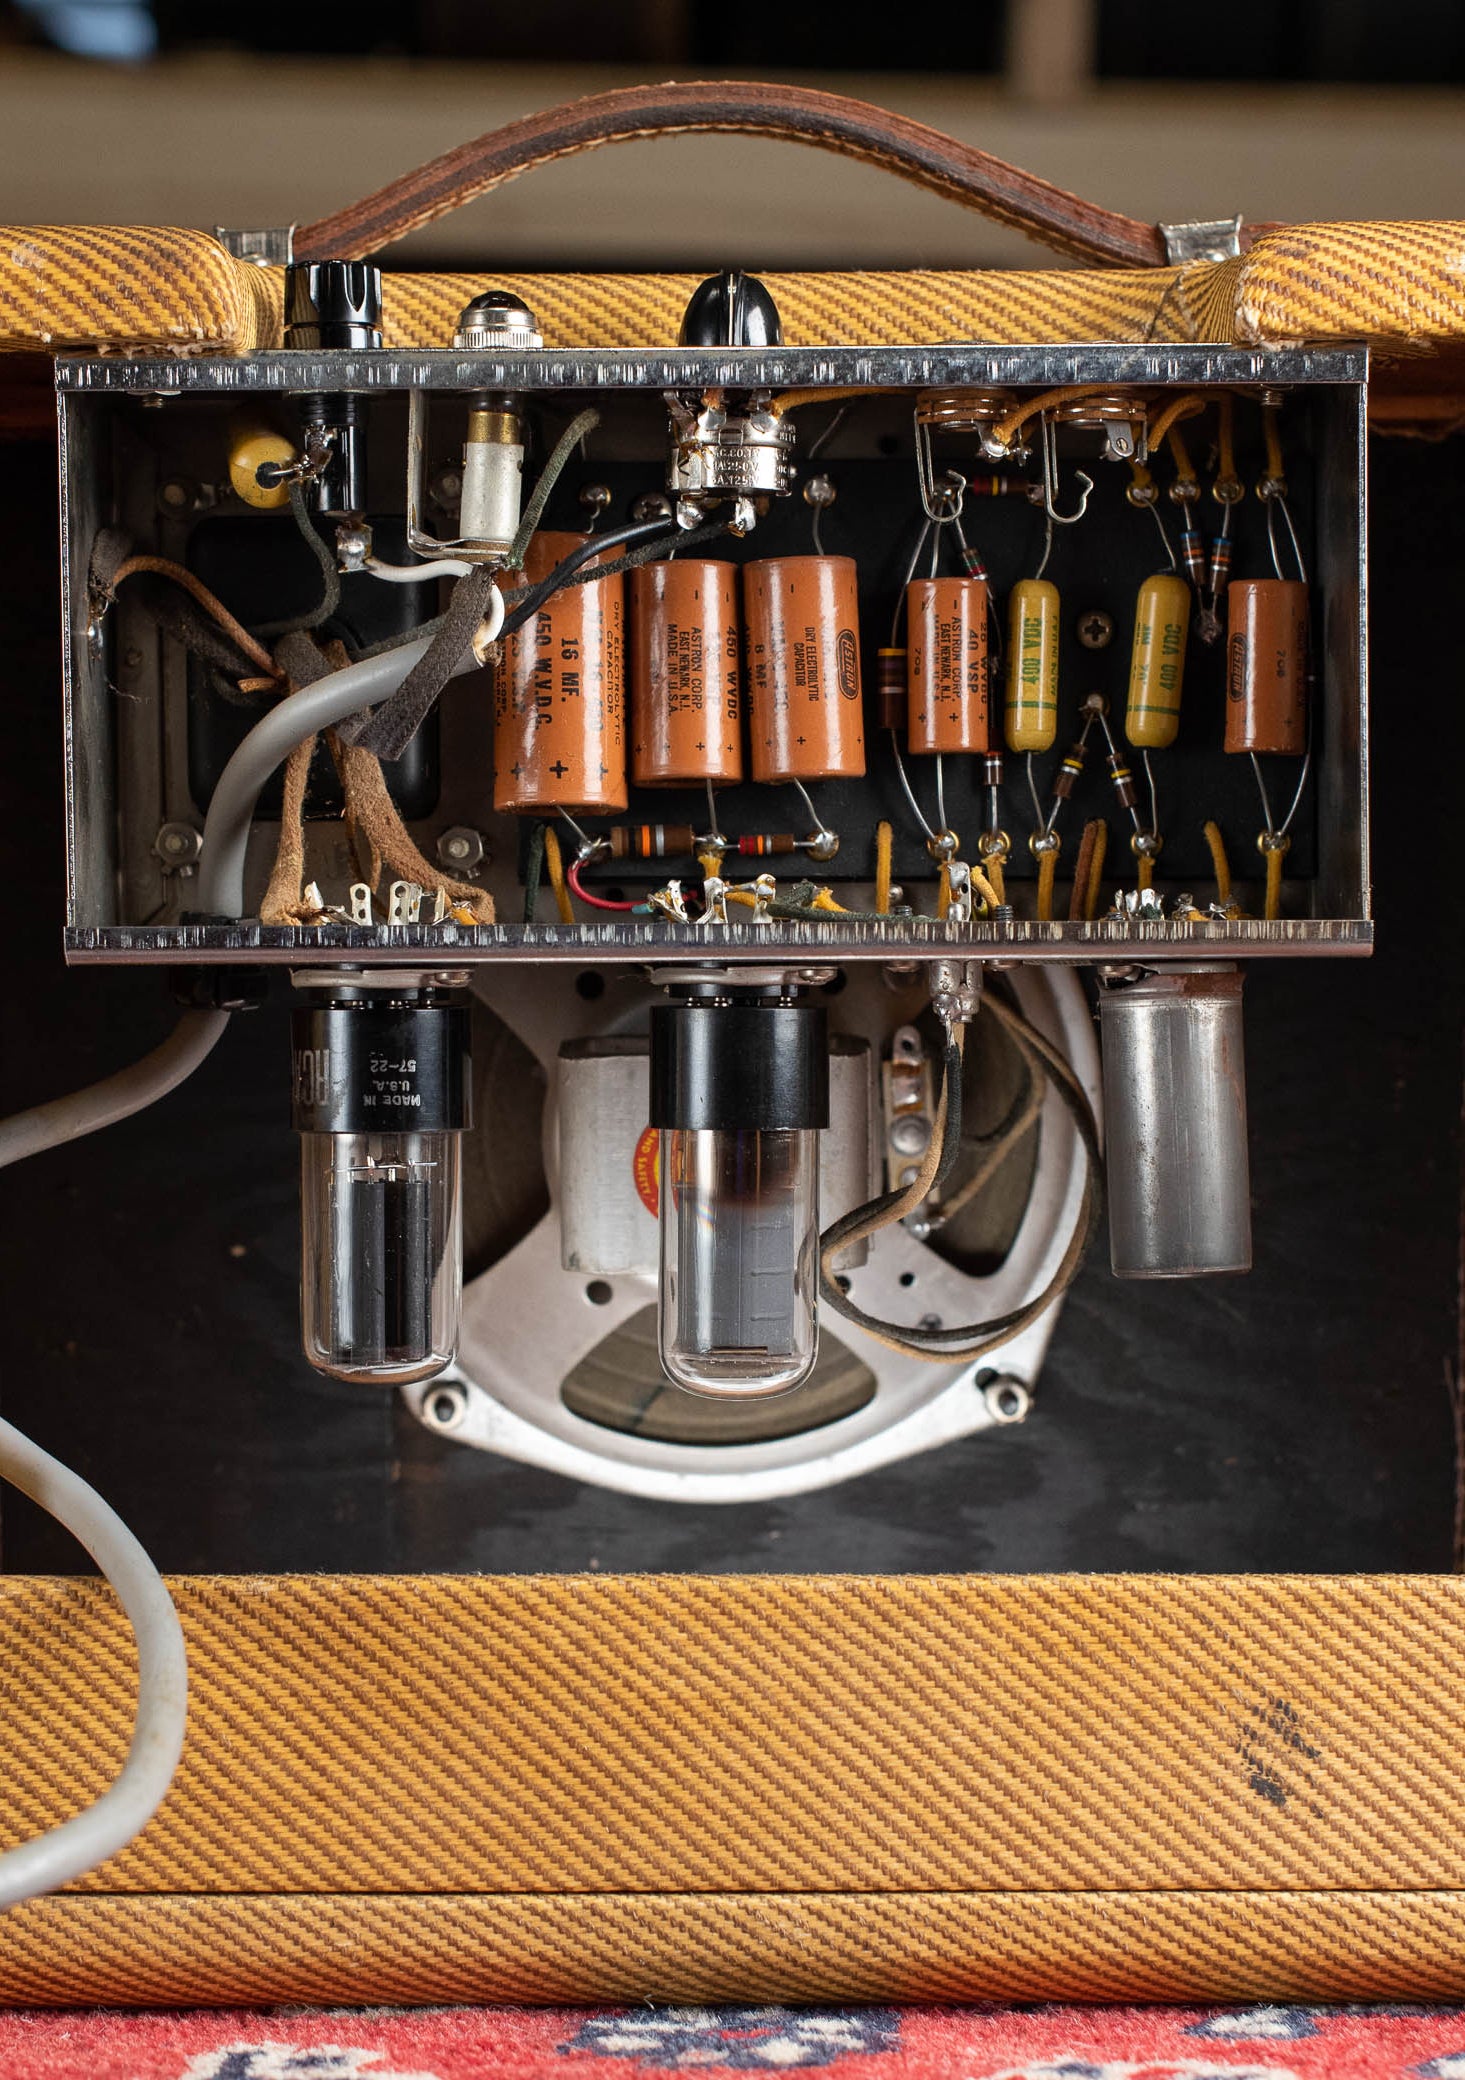 1957 Fender Champ chassis, Astron capacitors